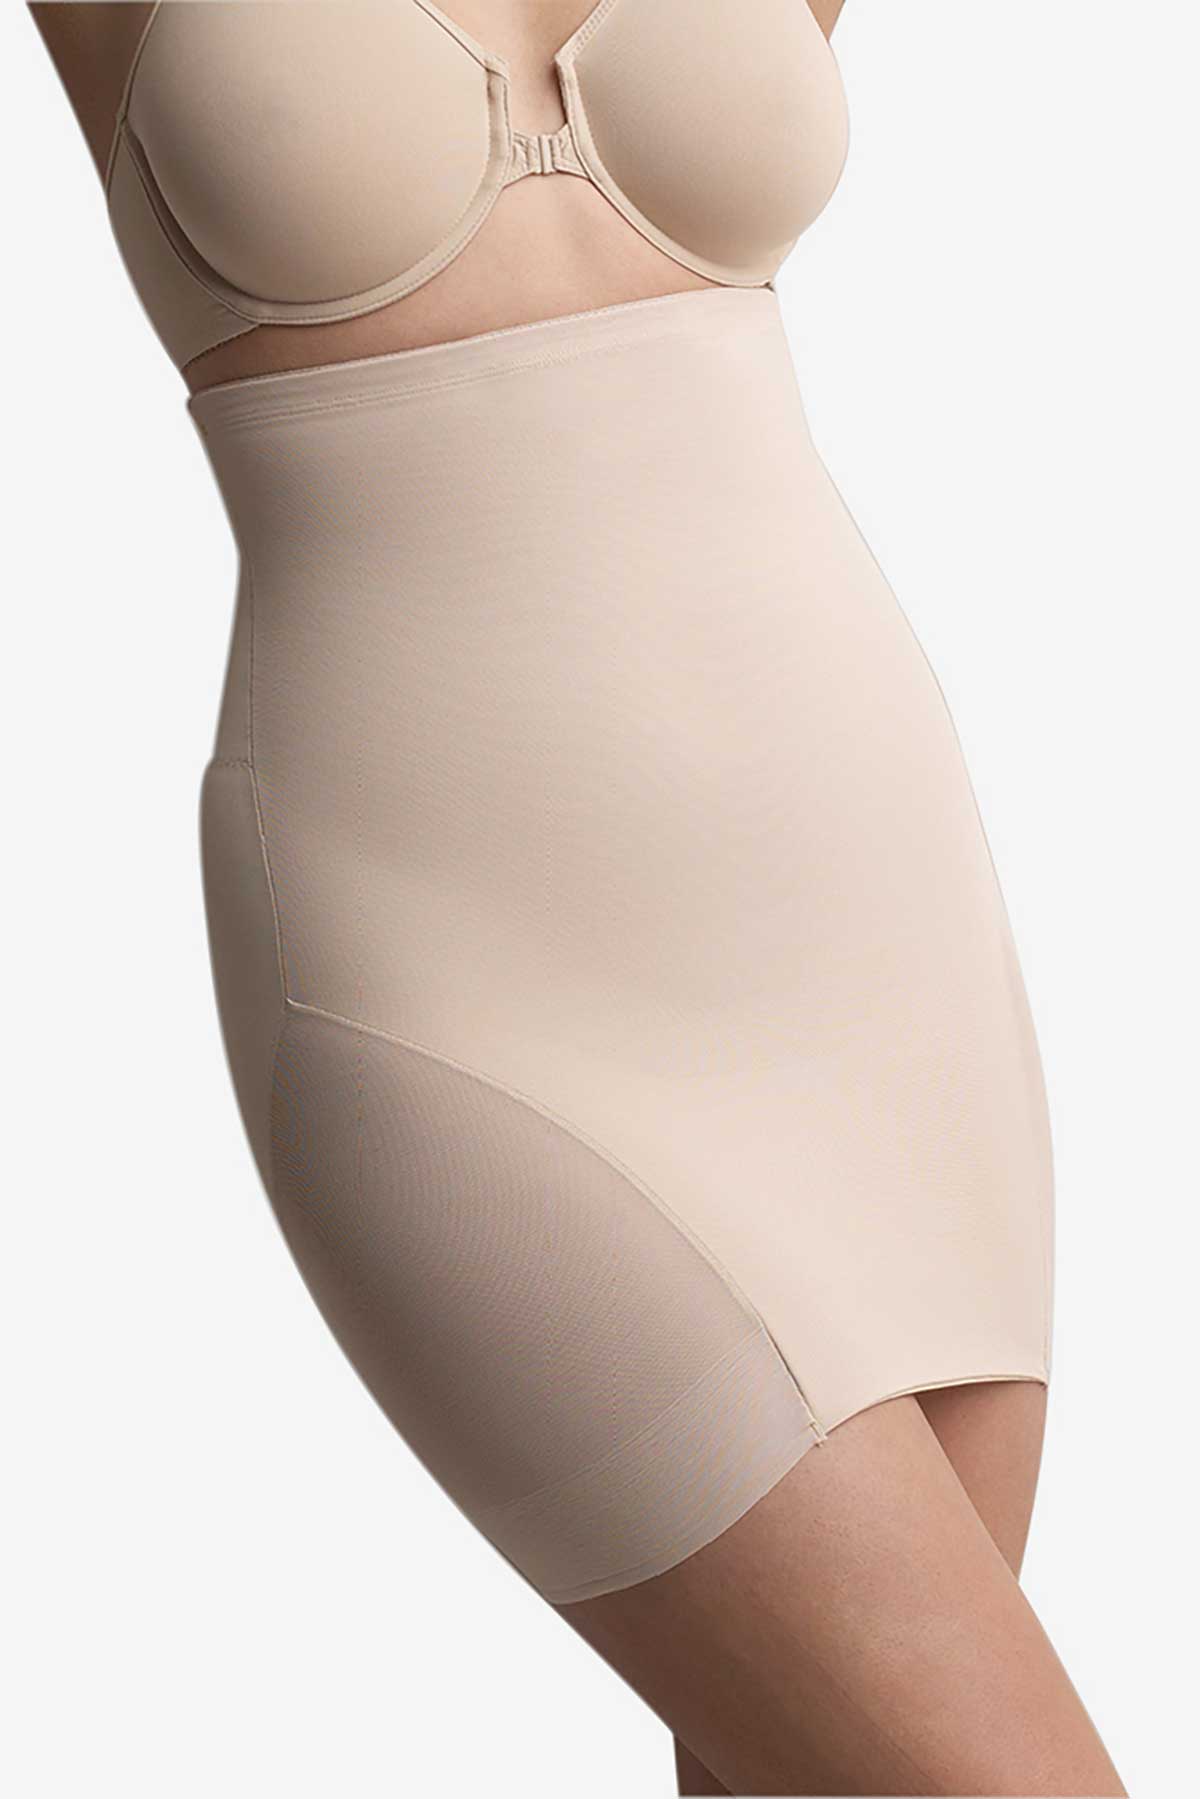 Miraclesuit Sexy Sheer Extra Firm Control High-Waist Half Slip